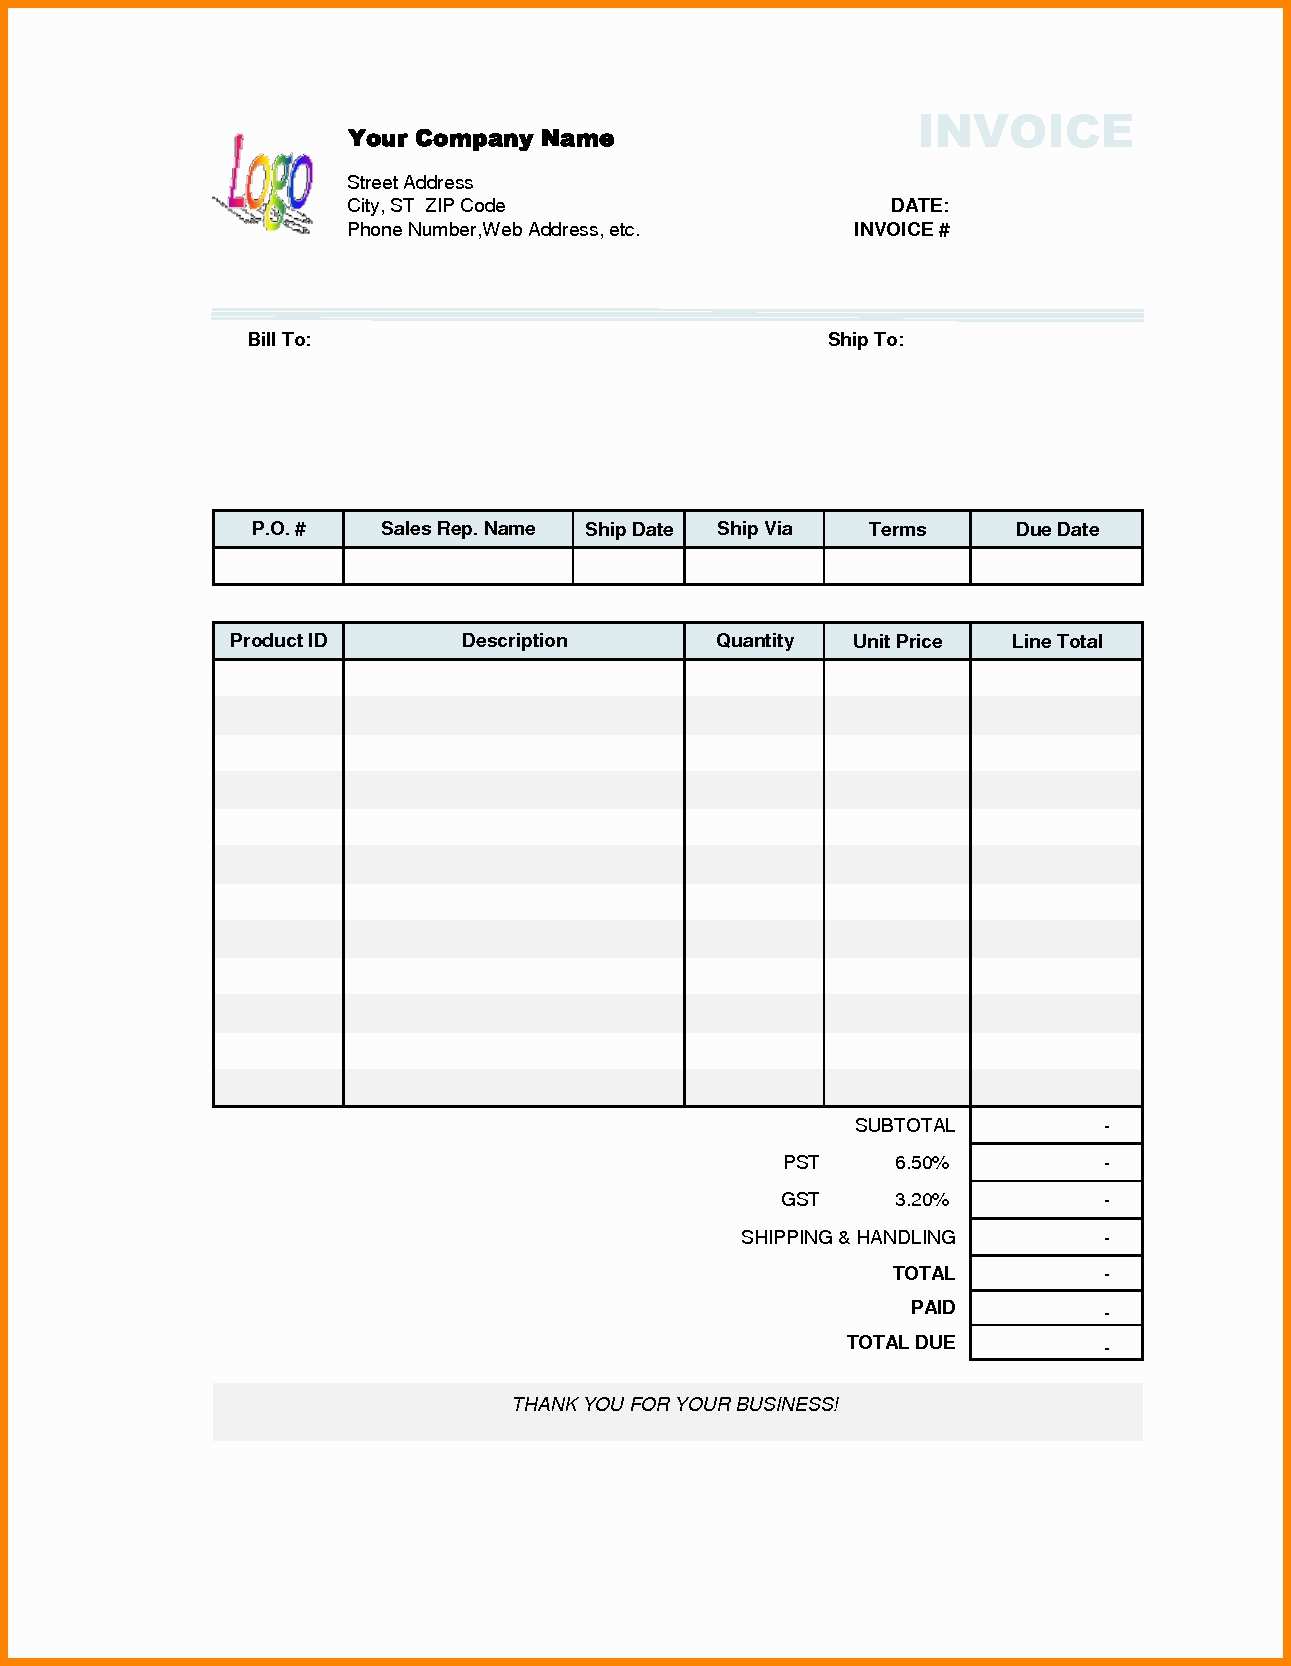 invoice-template-pages